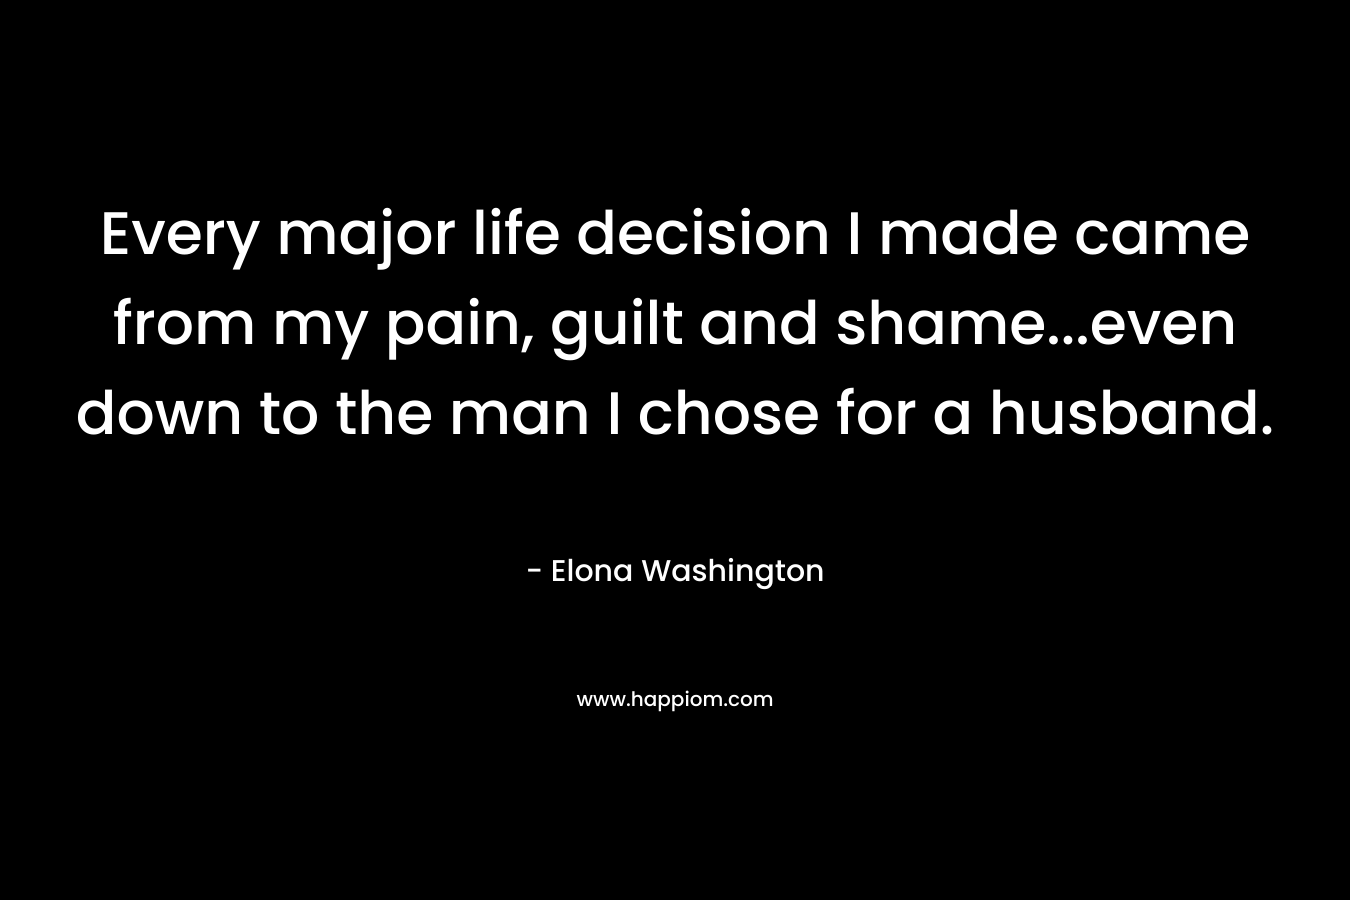 Every major life decision I made came from my pain, guilt and shame…even down to the man I chose for a husband. – Elona Washington